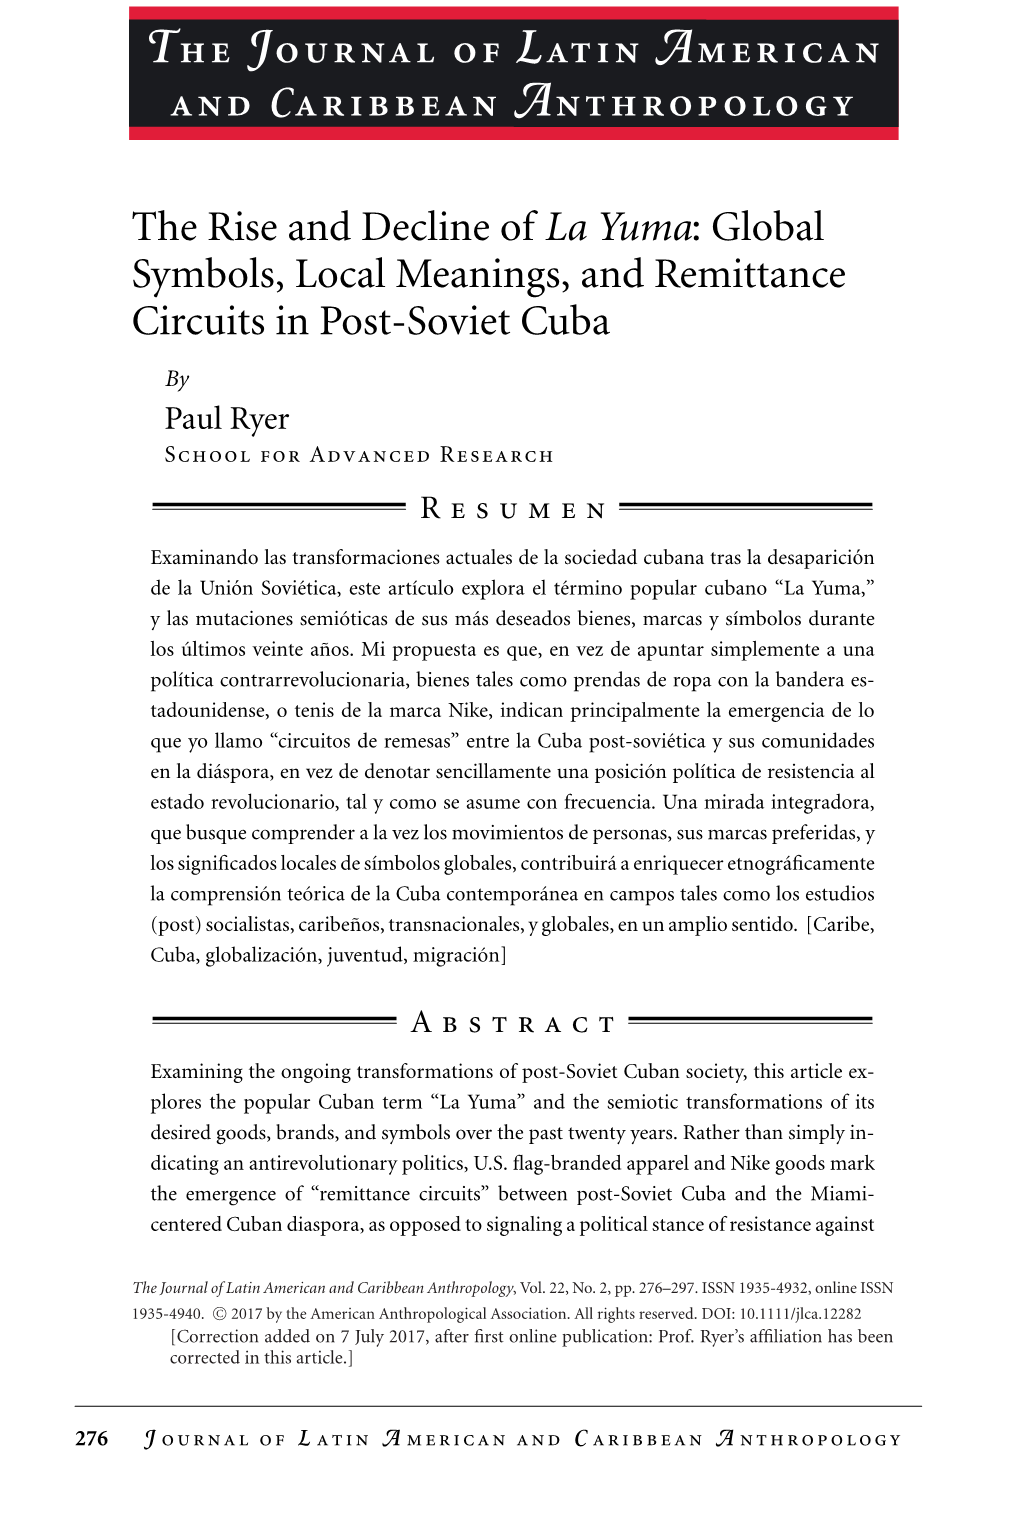 The Rise and Decline of La Yuma: Global Symbols, Local Meanings, and Remittance Circuits in Post-Soviet Cuba